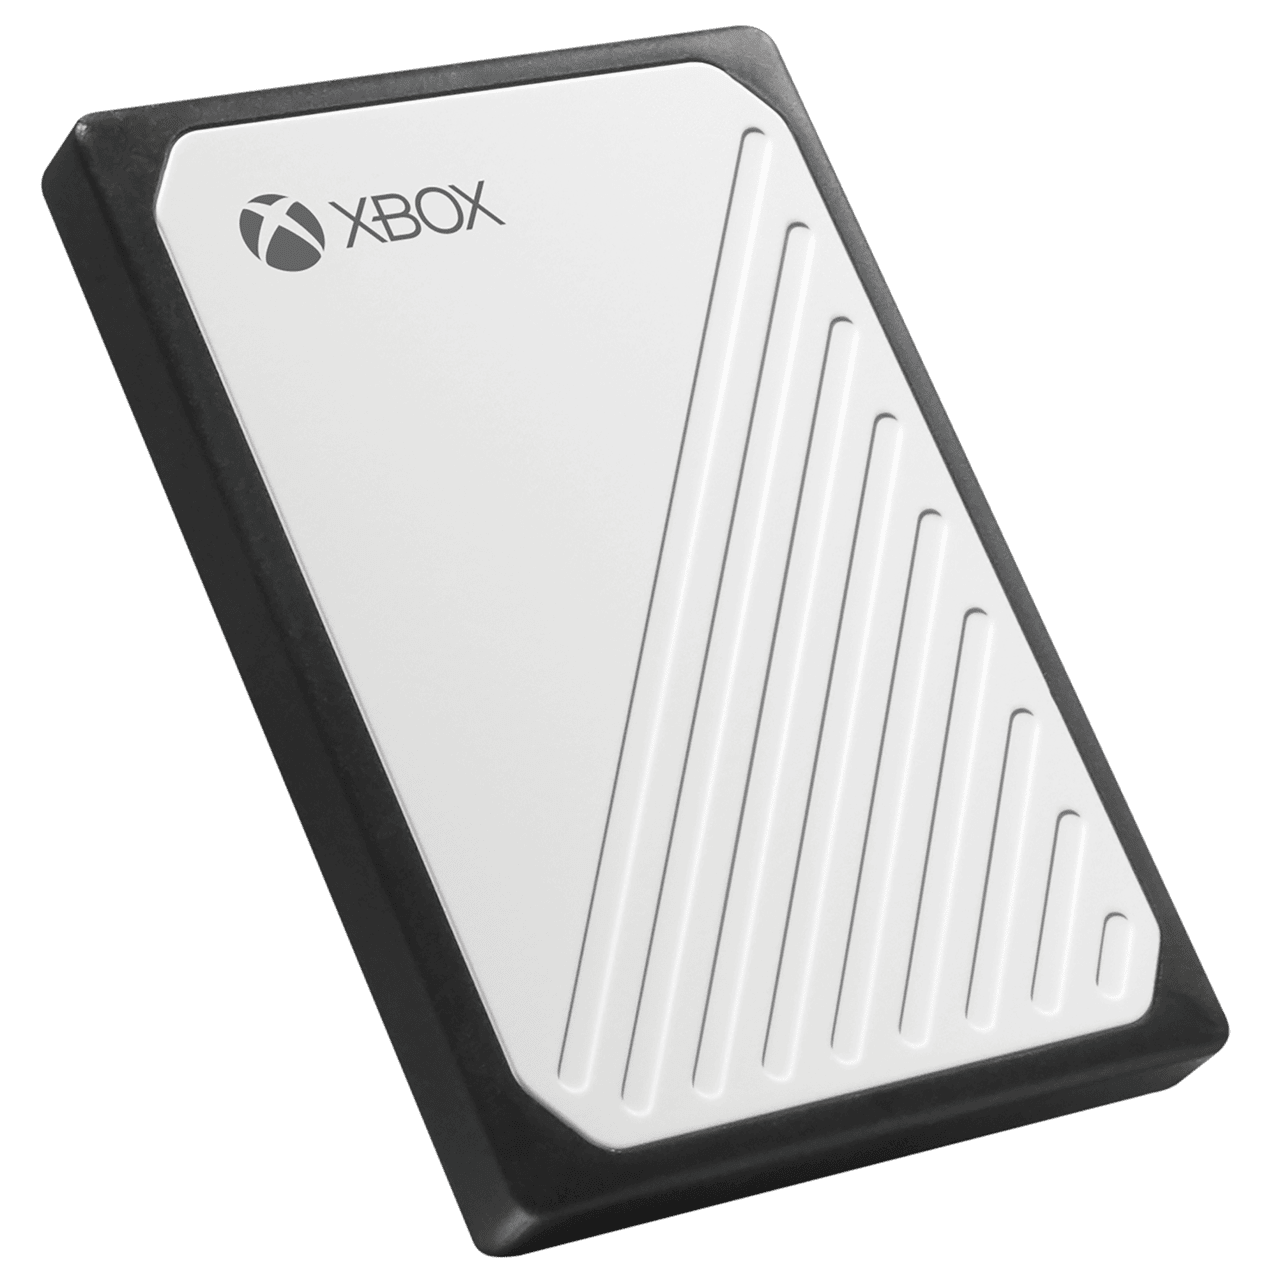 Xbox SSD. Wd gaming drive